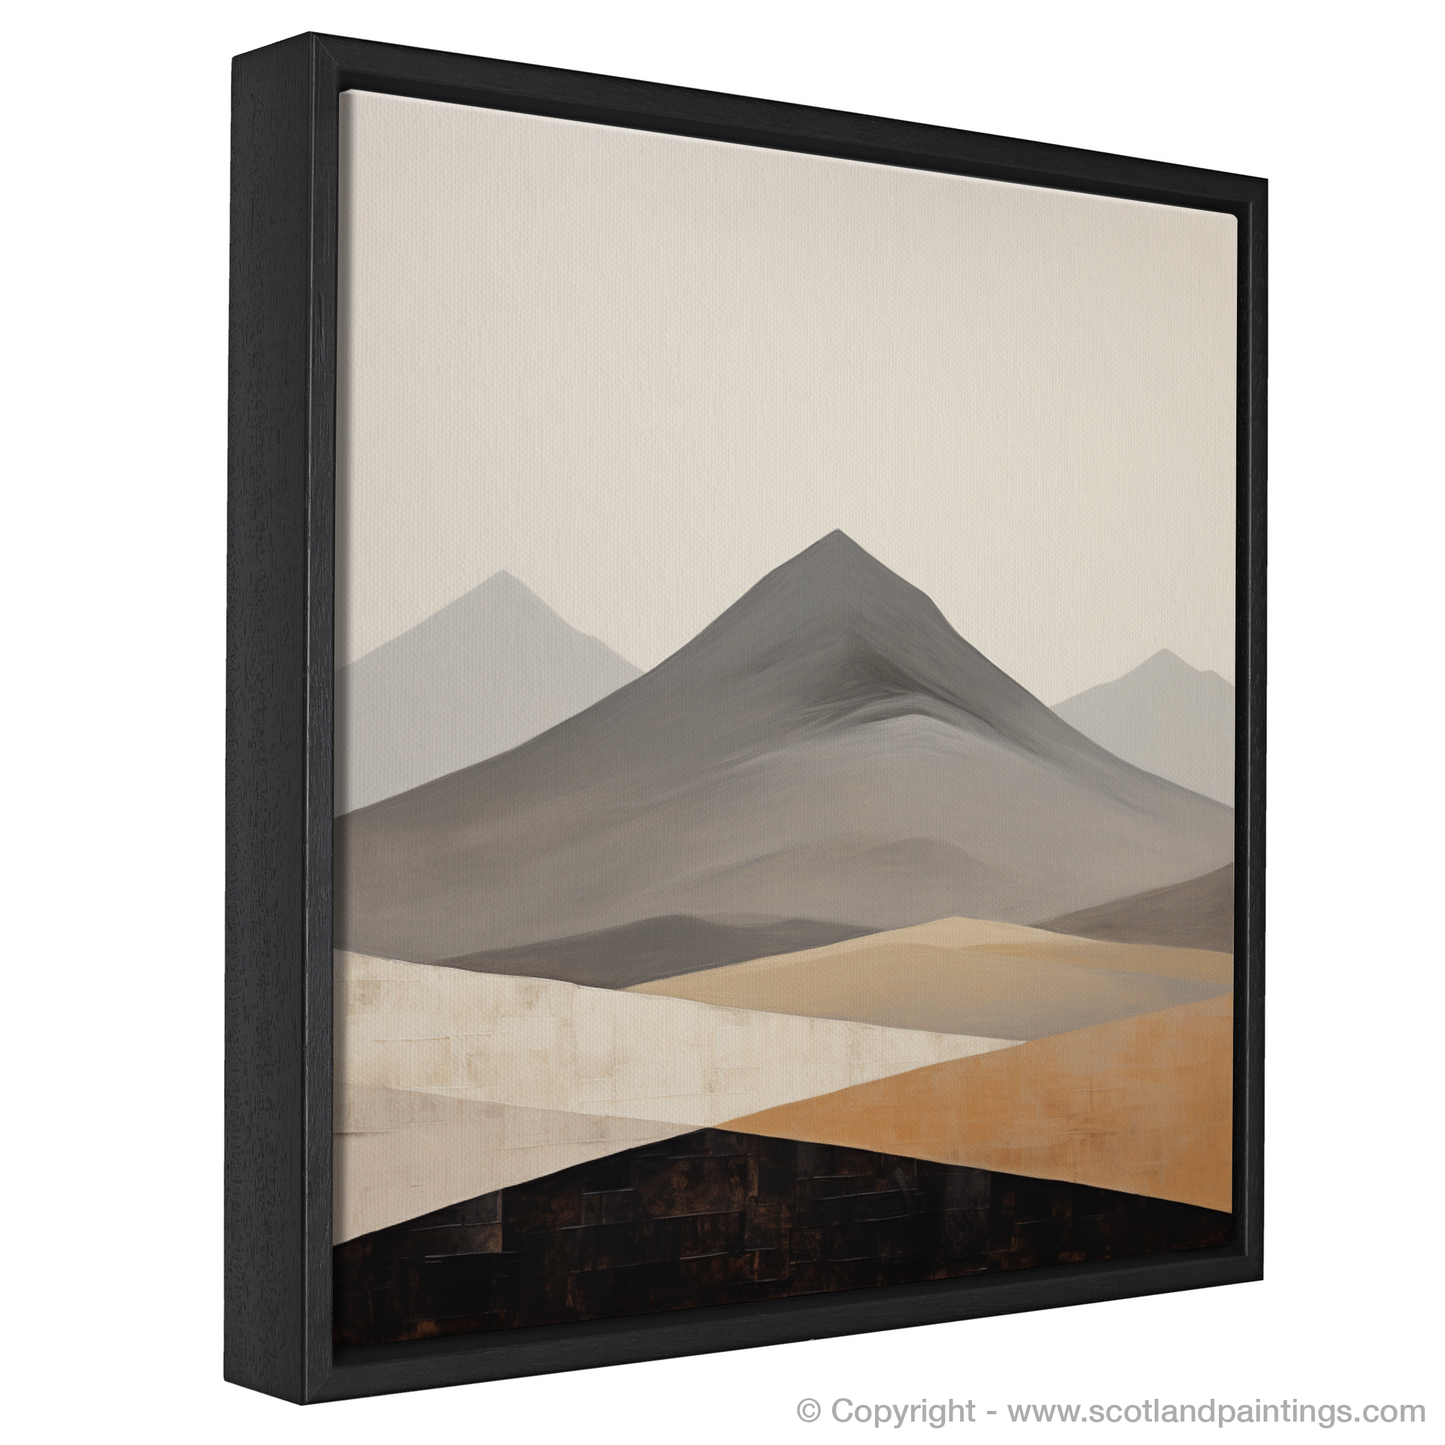 Painting and Art Print of Meall Garbh (Ben Lawers) entitled "Munro Essence: Meall Garbh Abstract".